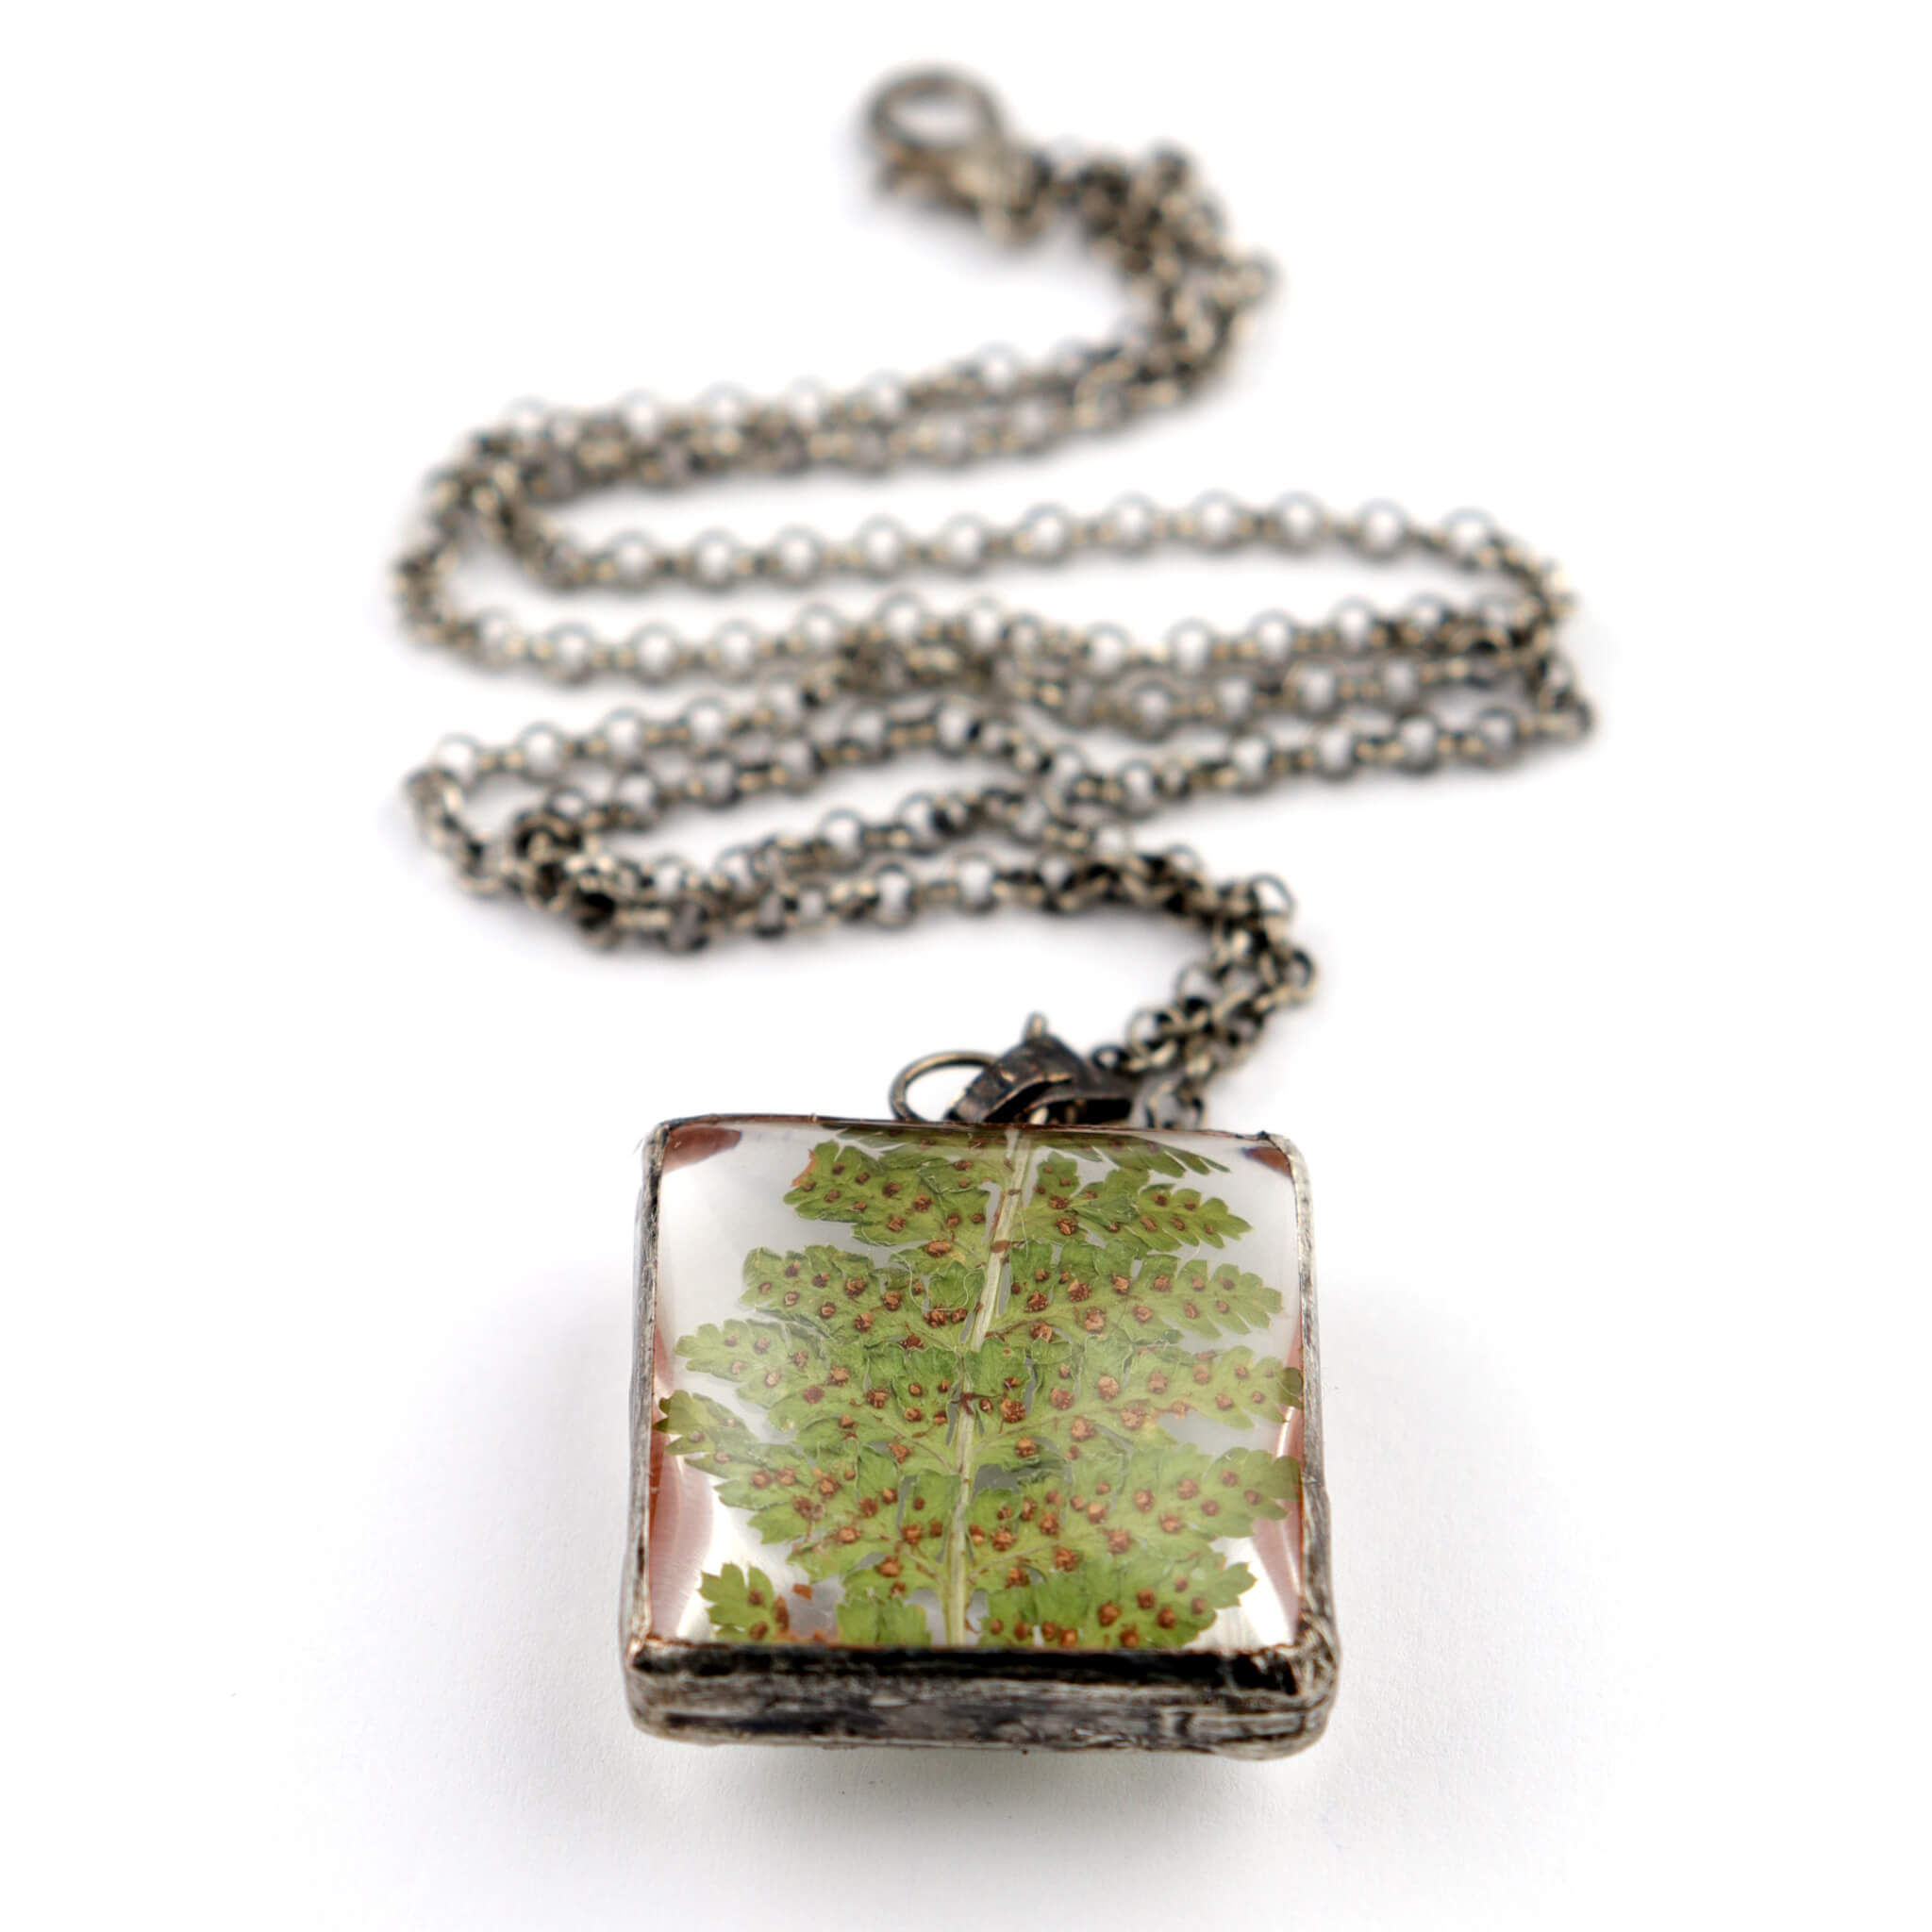 Square necklace with dry fern inside the magnifying glass